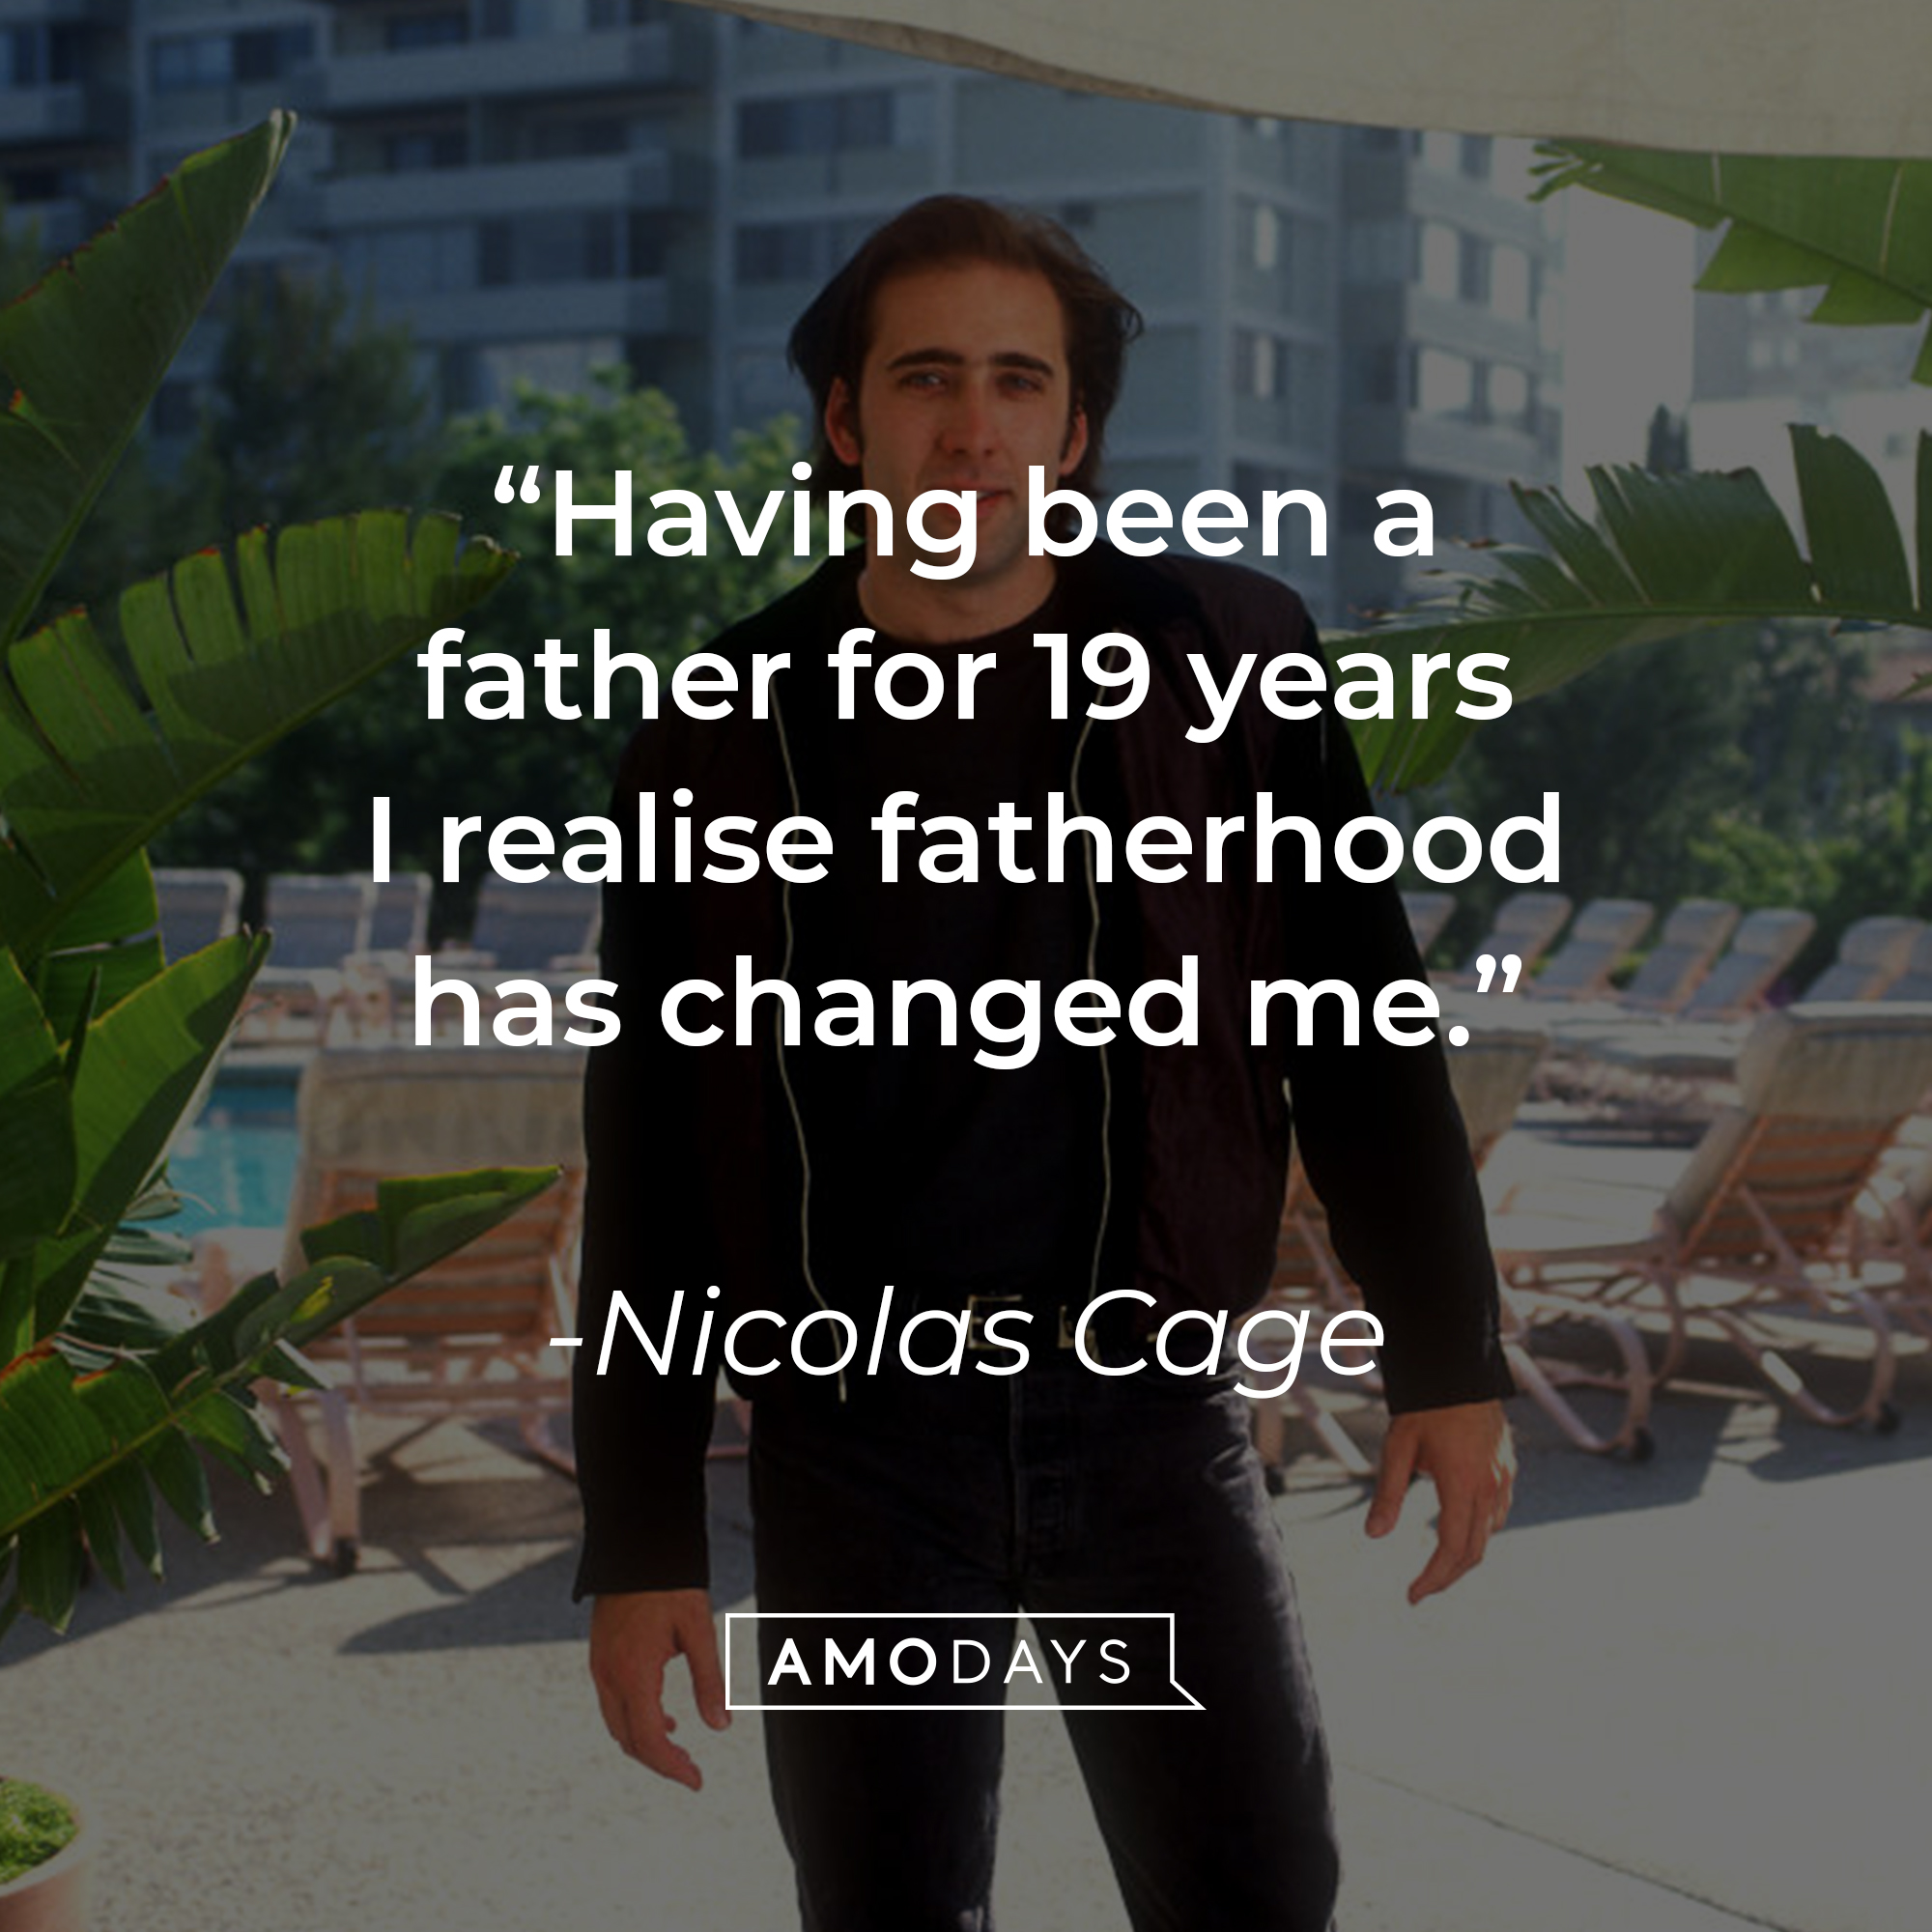 Nicolas Cage's quote: "Having been a father for 19 years I realise fatherhood has changed me." | Source: Getty Images